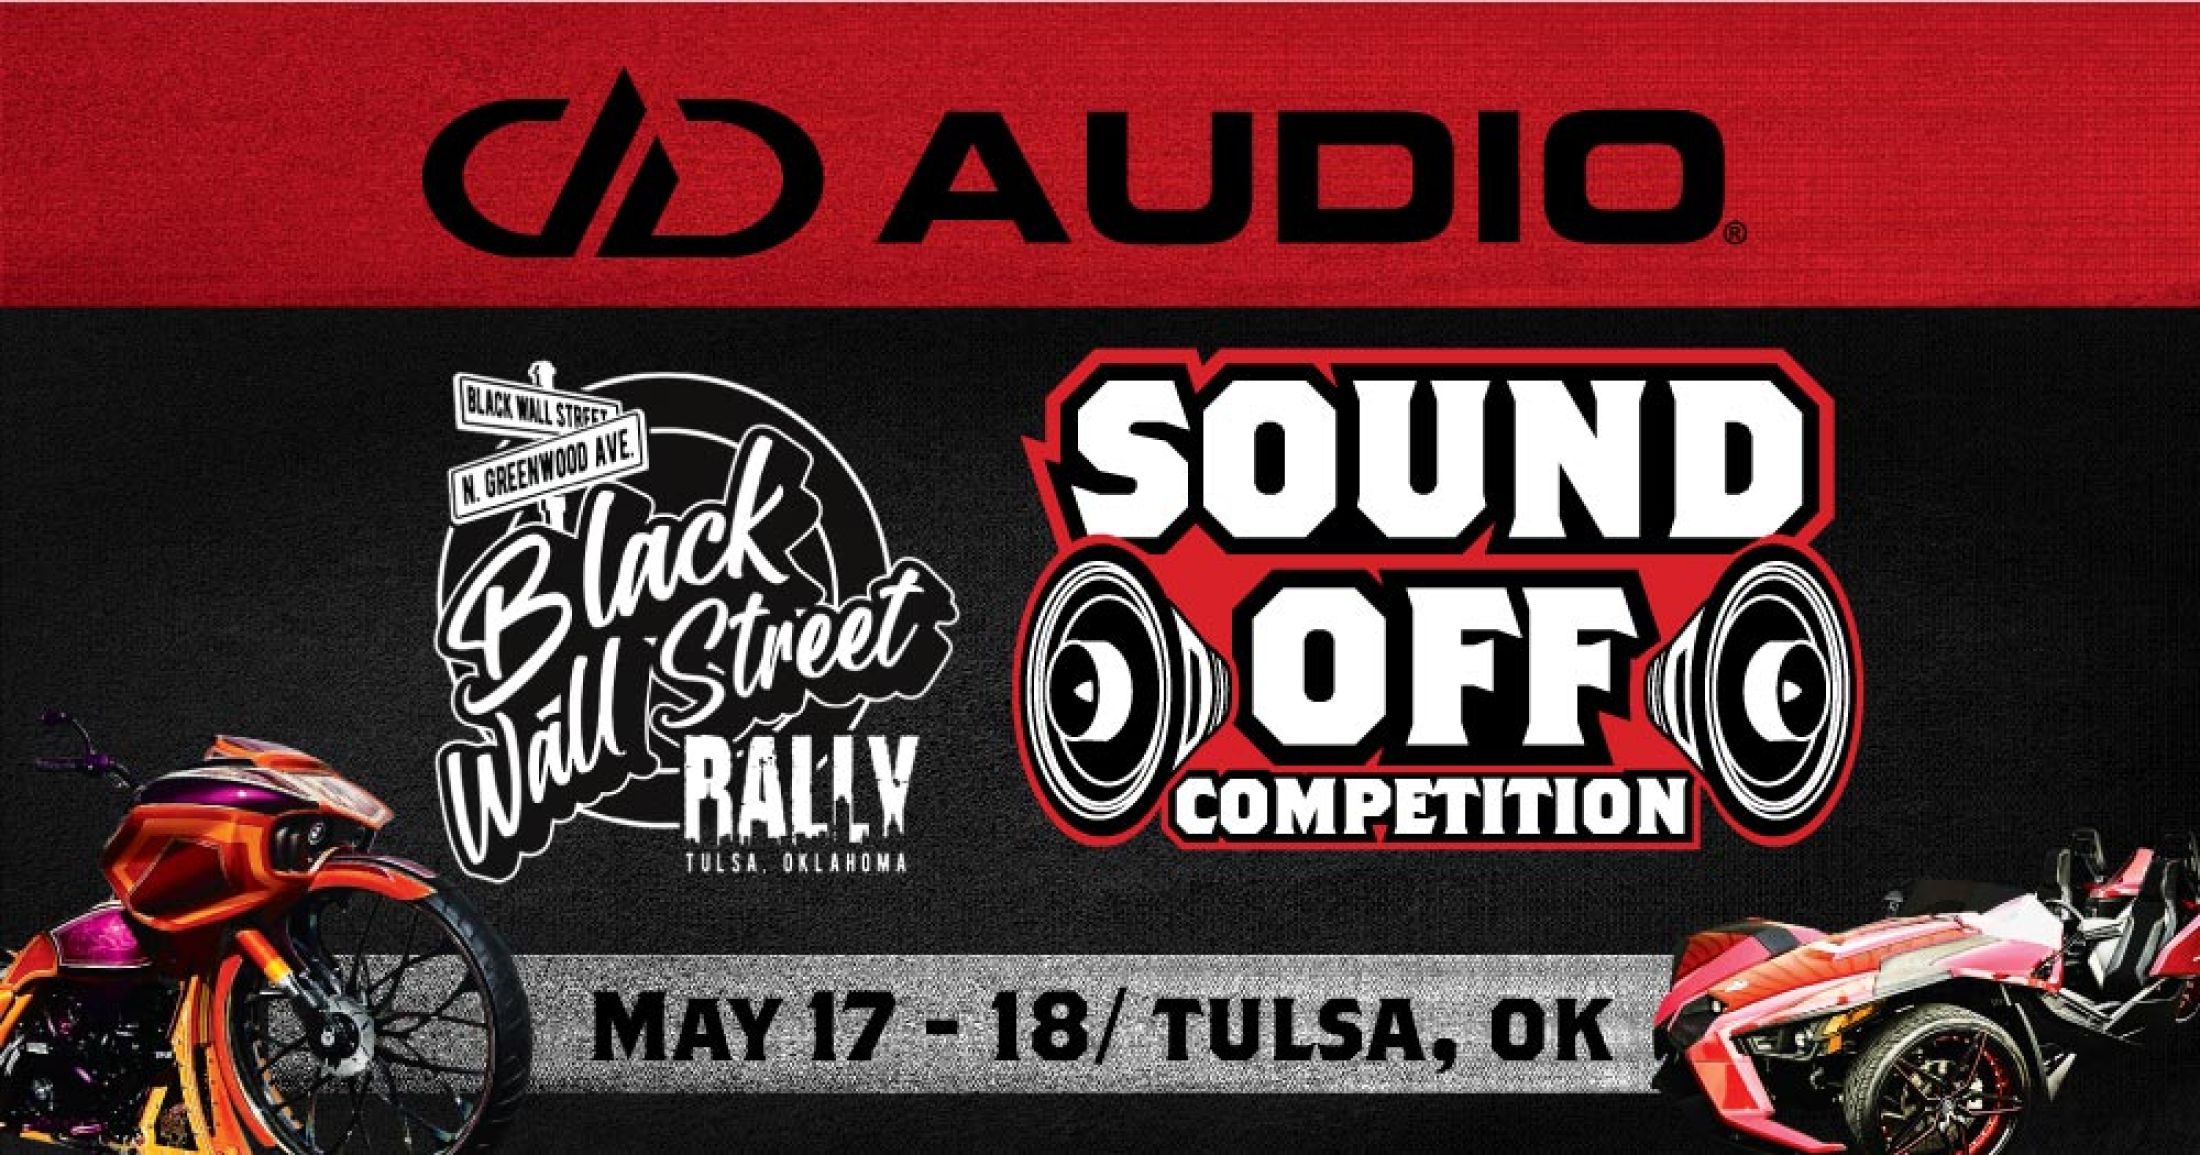 Graphic for DD AUDIO Black Wall Street Rally Sound Off Competition May 17 - 18 in Tulsa OK